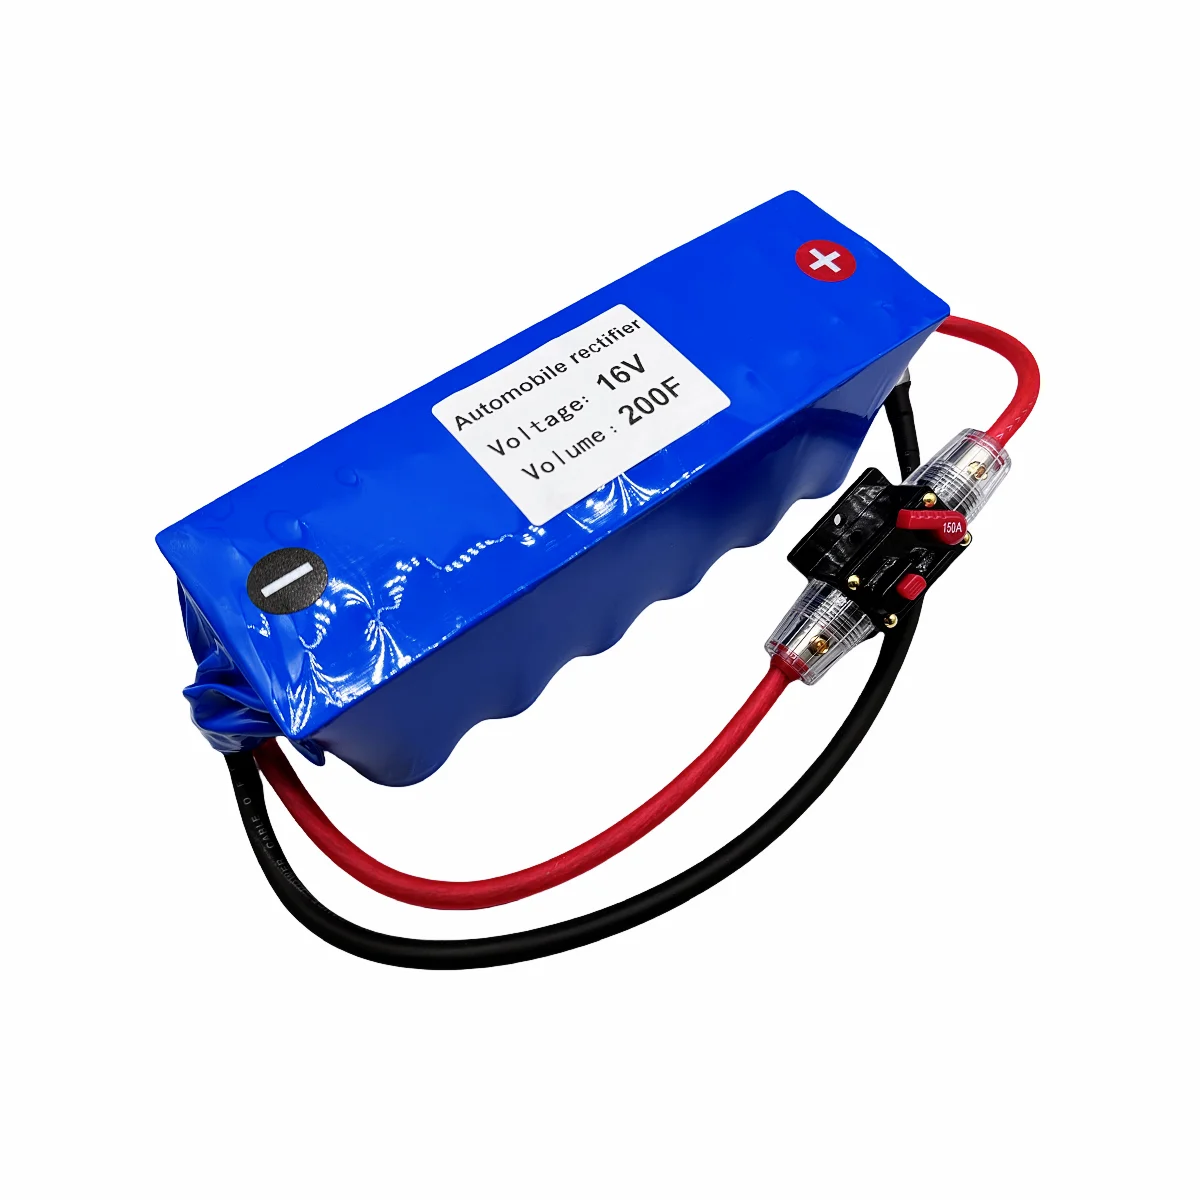 

Supercapacitor Maxwell 16V200F electric vehicle with long charging/discharging cycle time and high temperature resistance